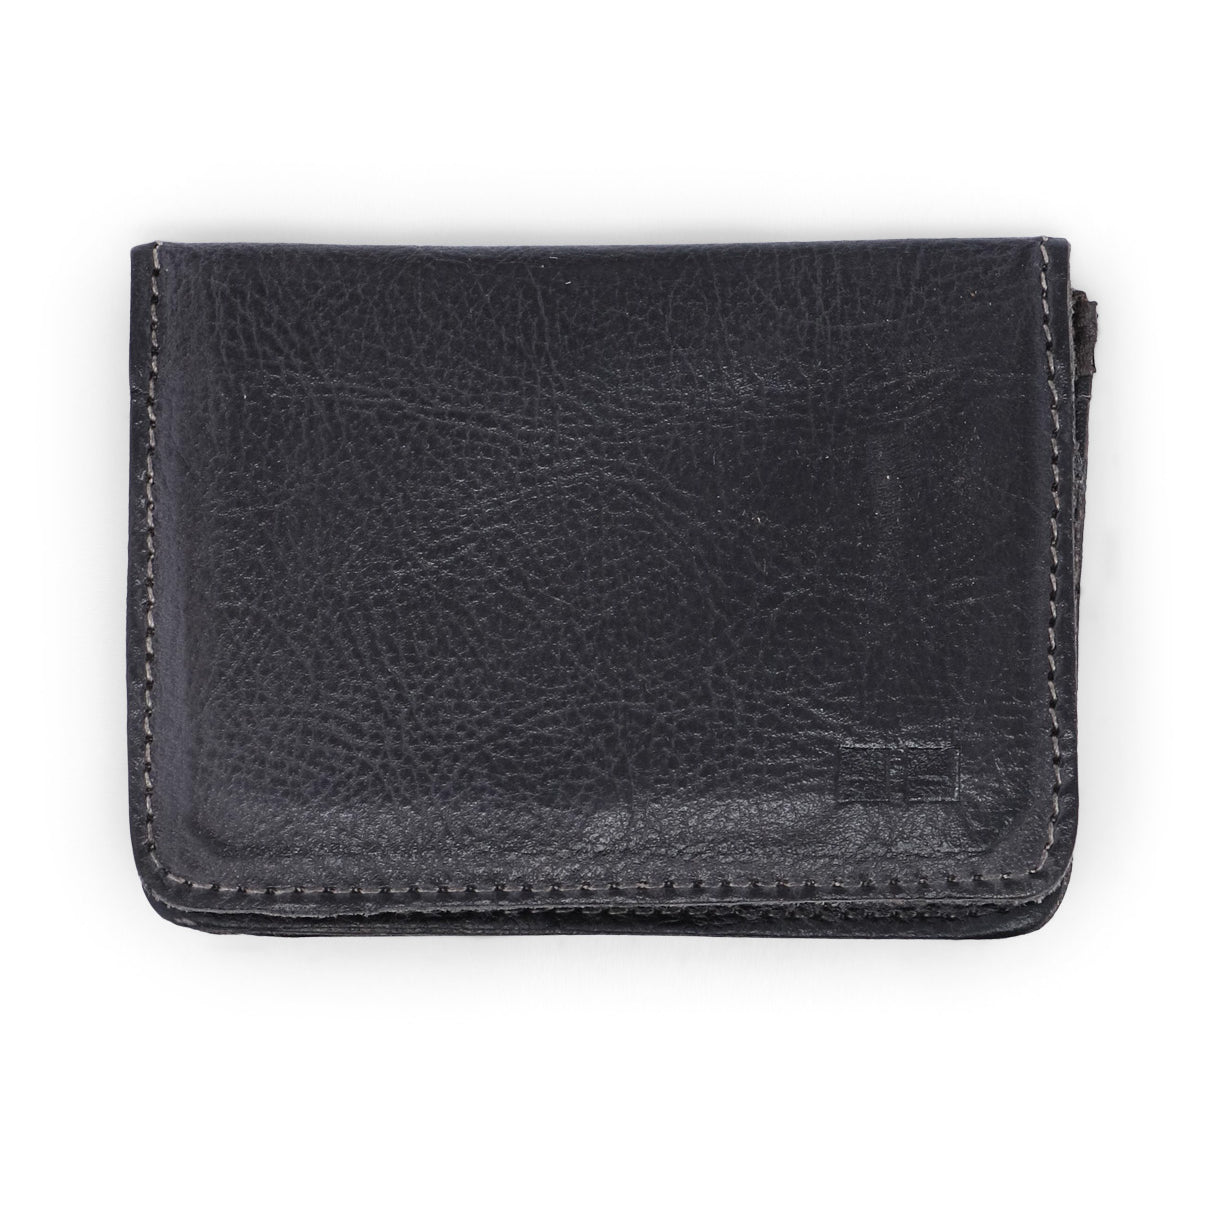 A Bed Stu black leather Jeor wallet on a white background.